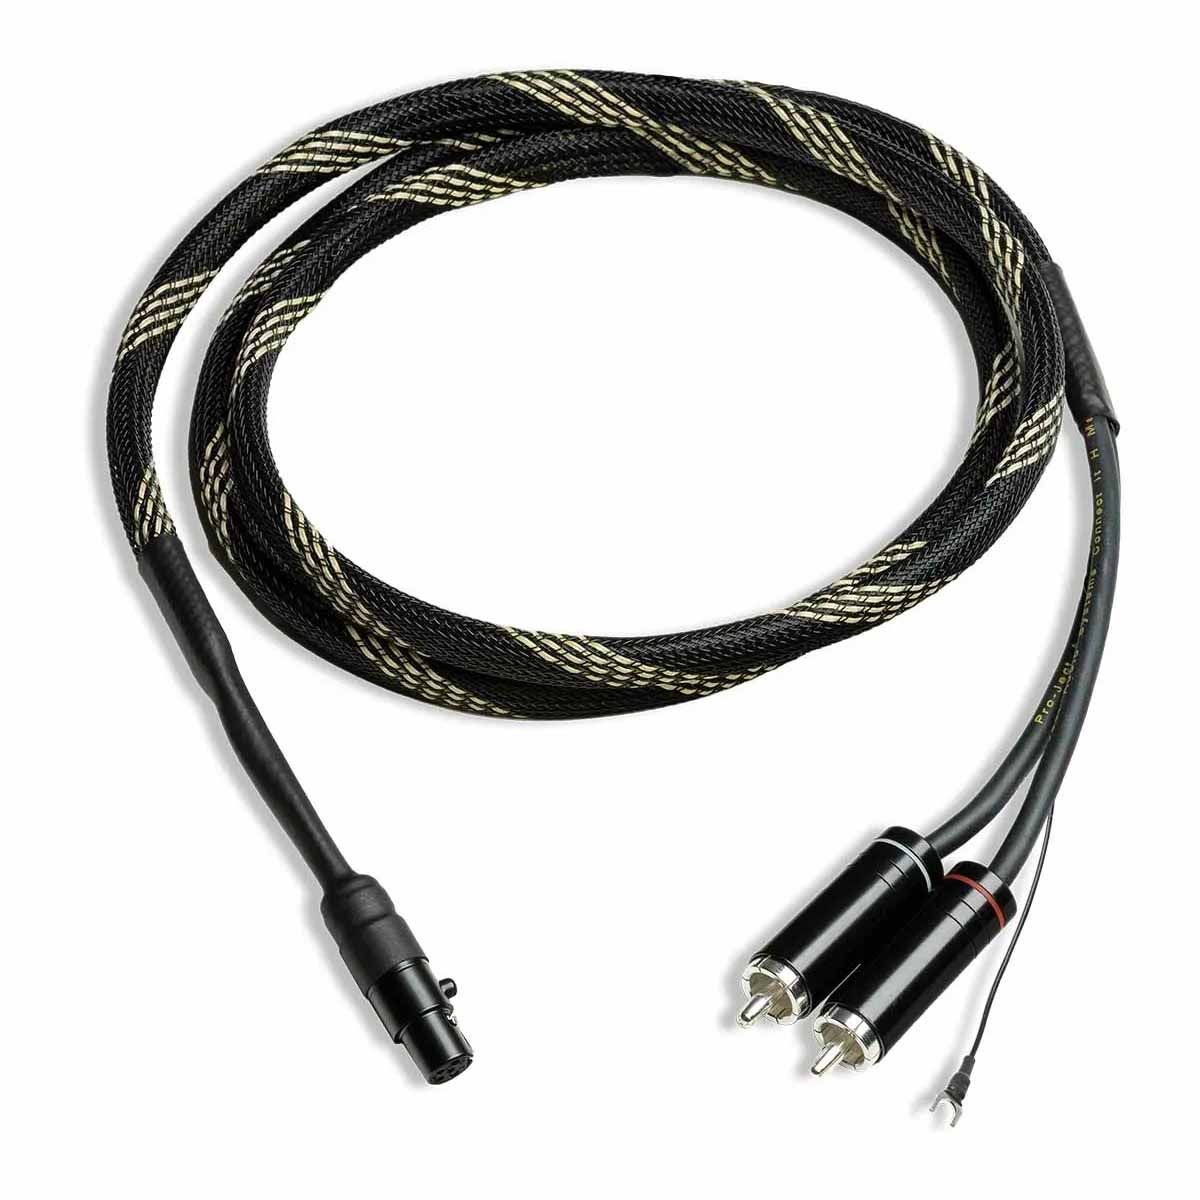 Pro-Ject Connect It Phono DS RCA to Mini XLR Phono Cable